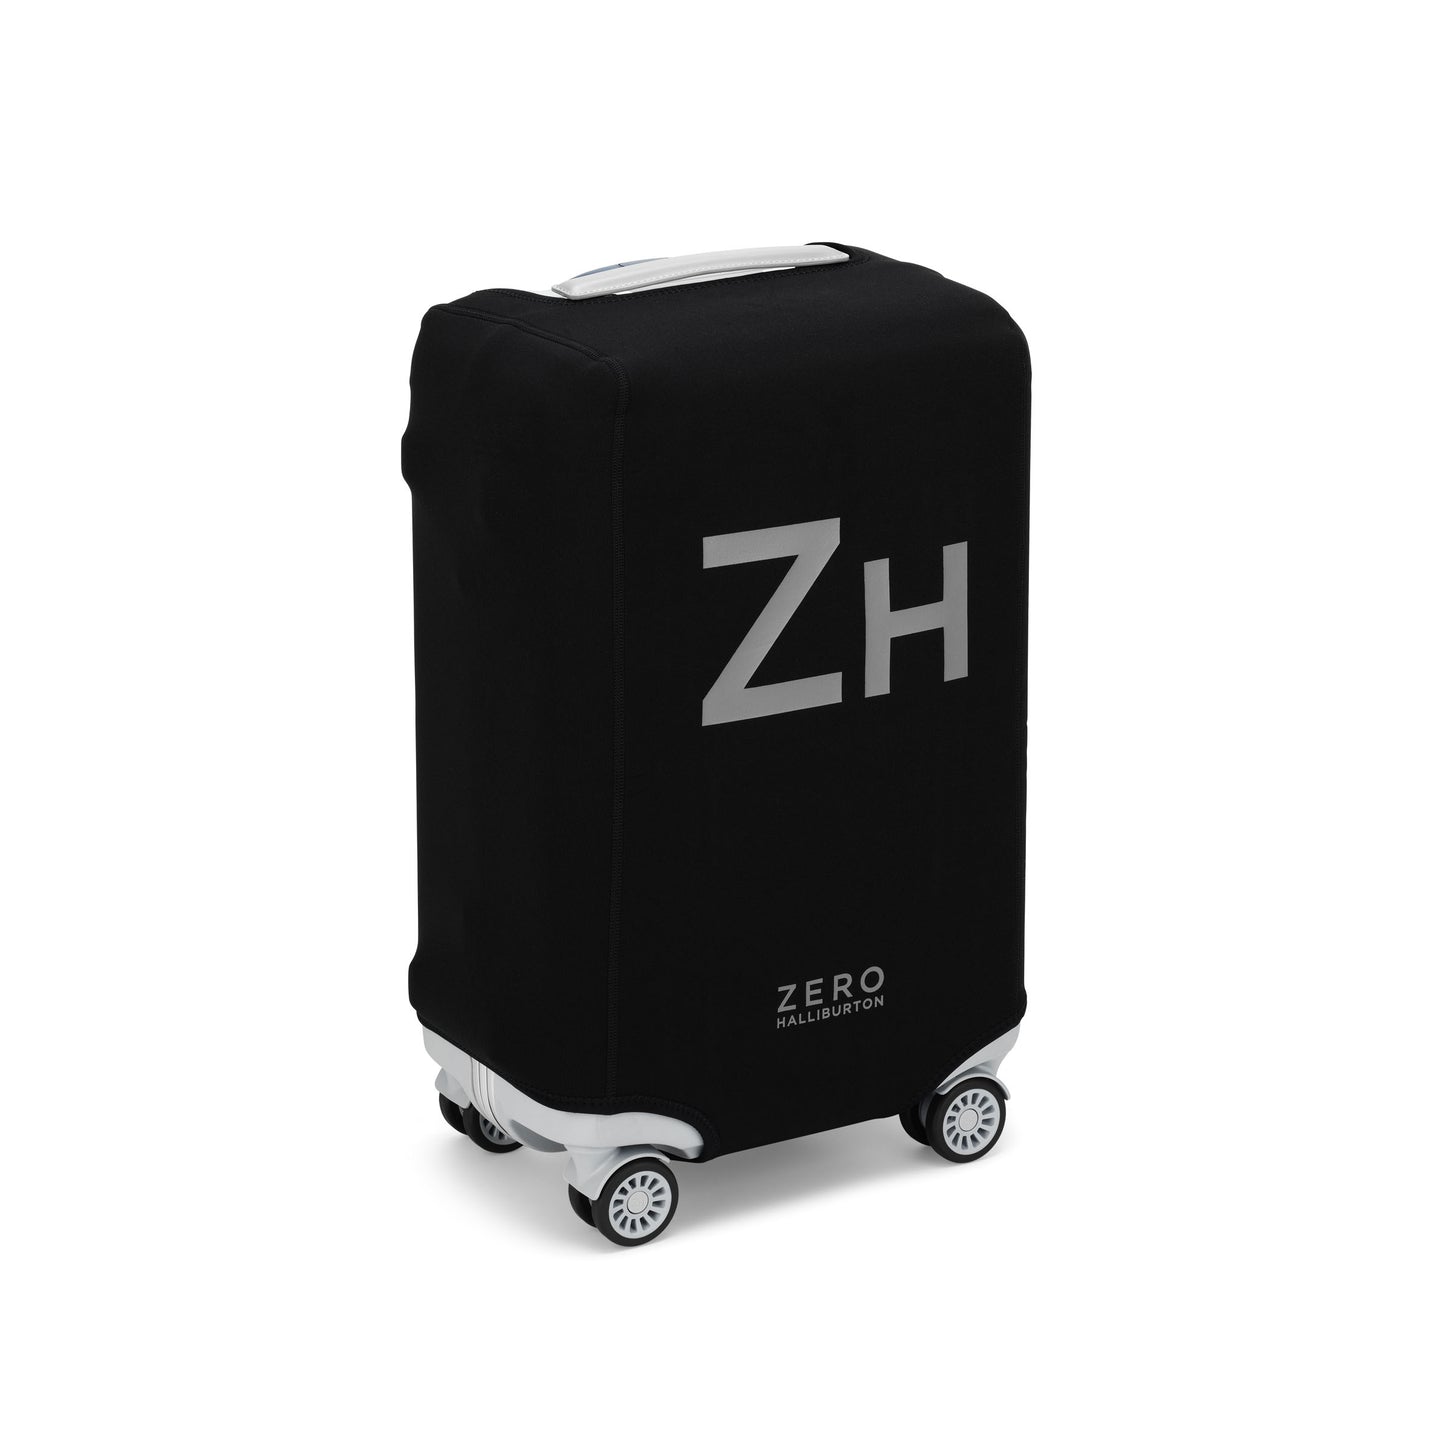 Accessories | Gen ZH Luggage Cover International